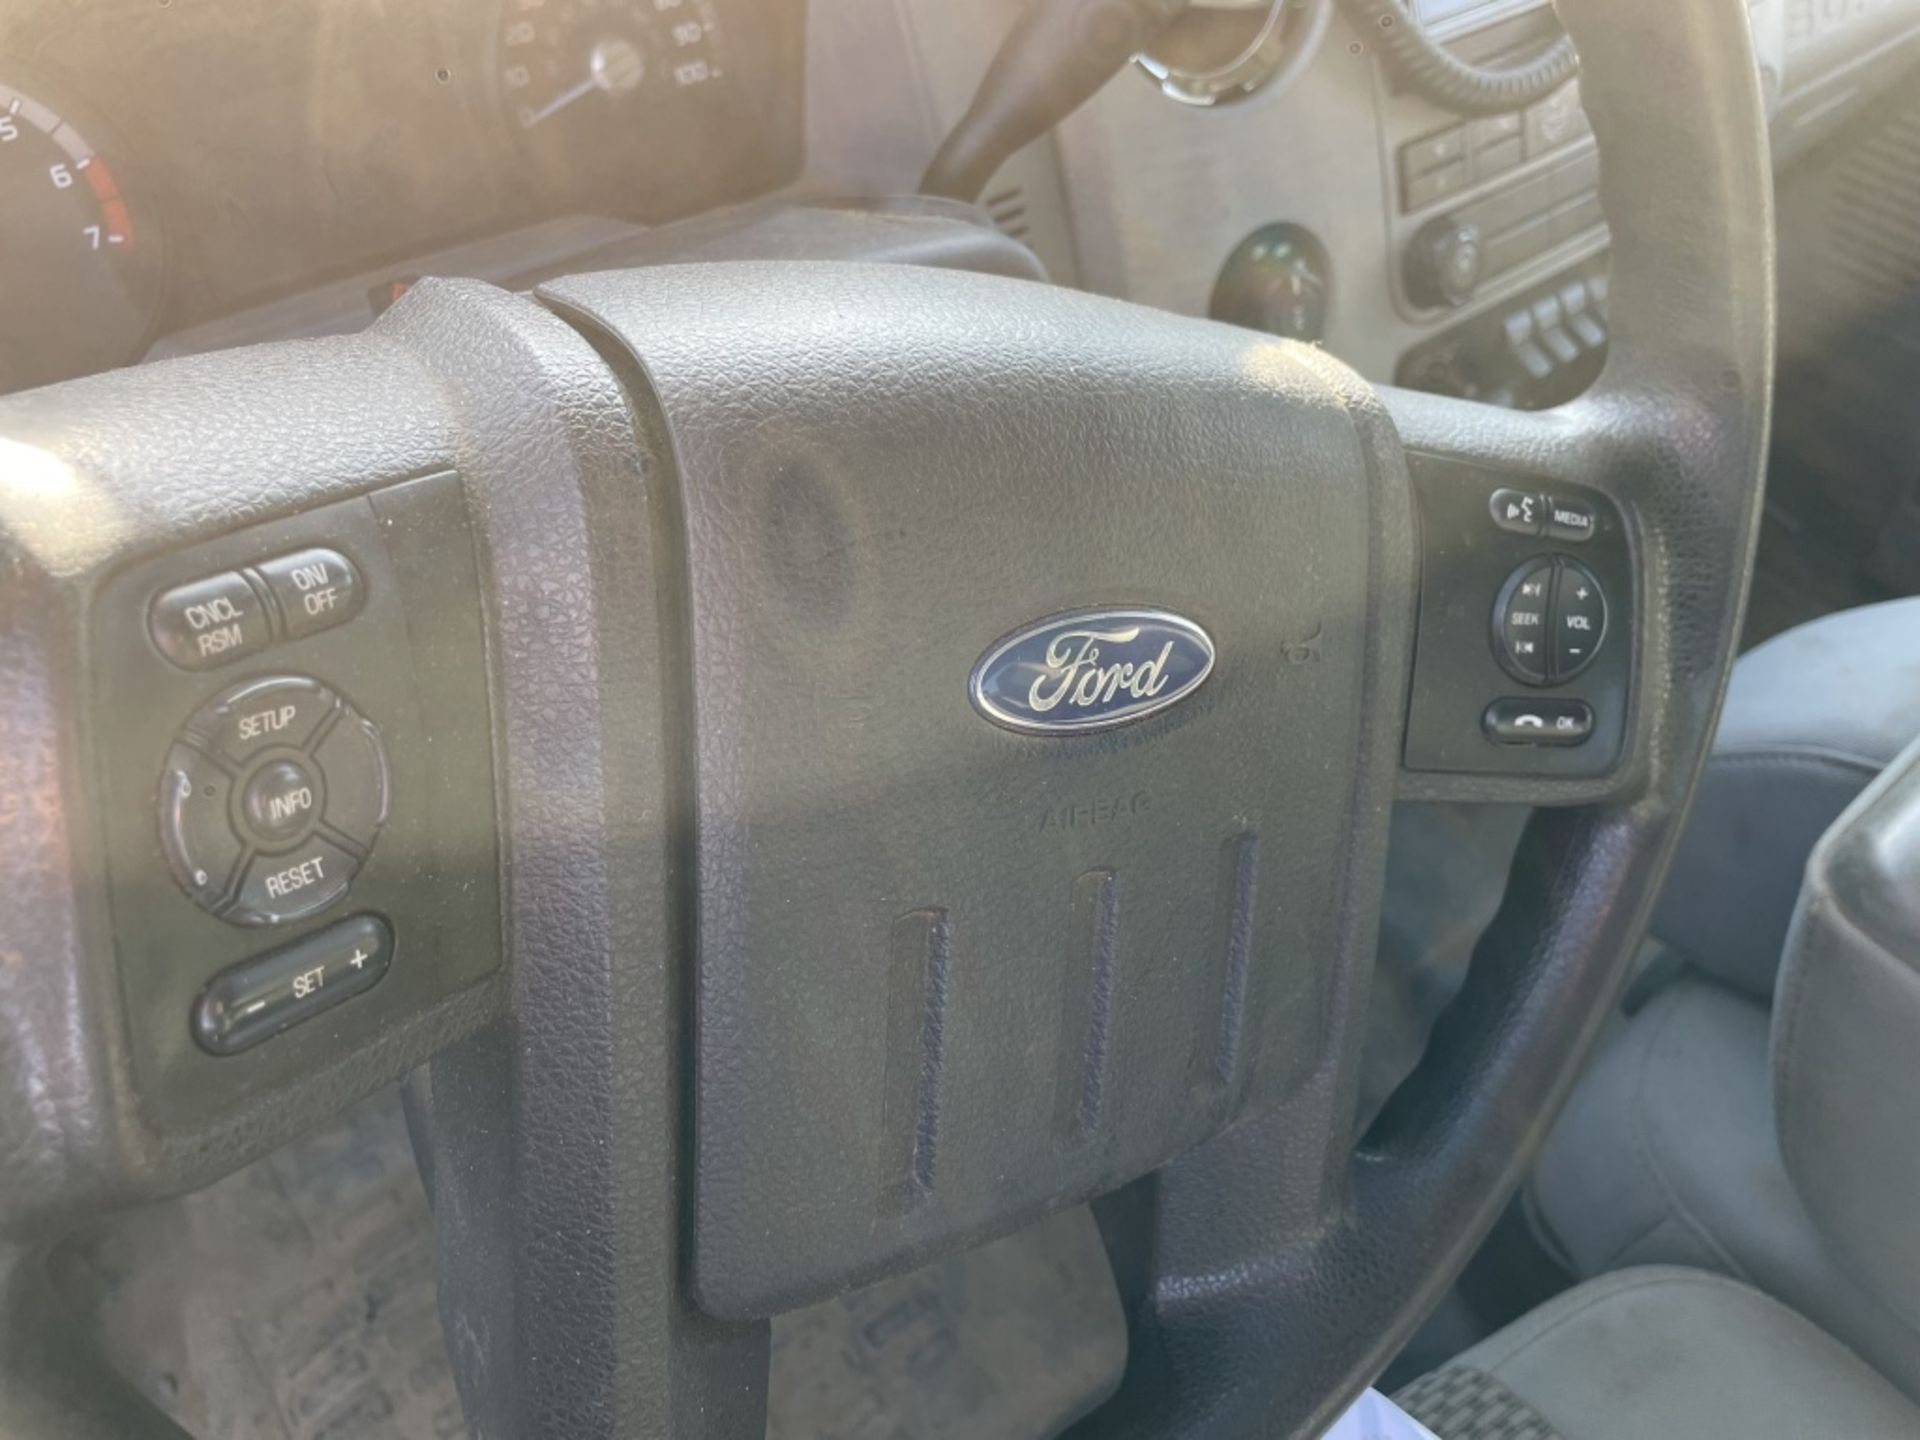 2015 Ford F350 XLT SD 4x4 Crew Cab Pickup - Image 17 of 22